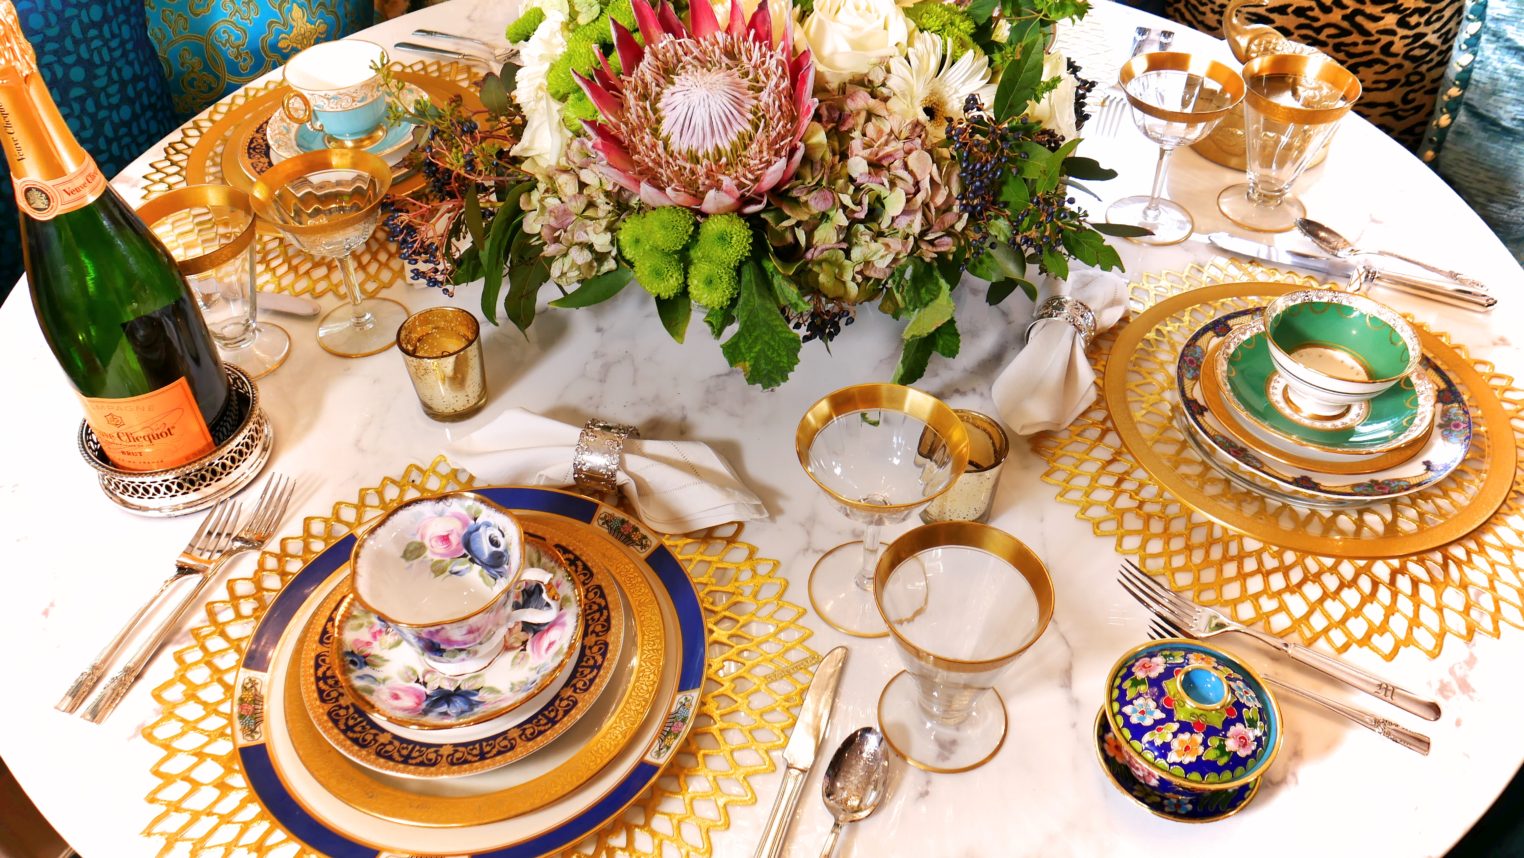 4 Steps to Create Meaningful Thanksgiving Table Centerpieces - Details on The Pillow Goddess blog